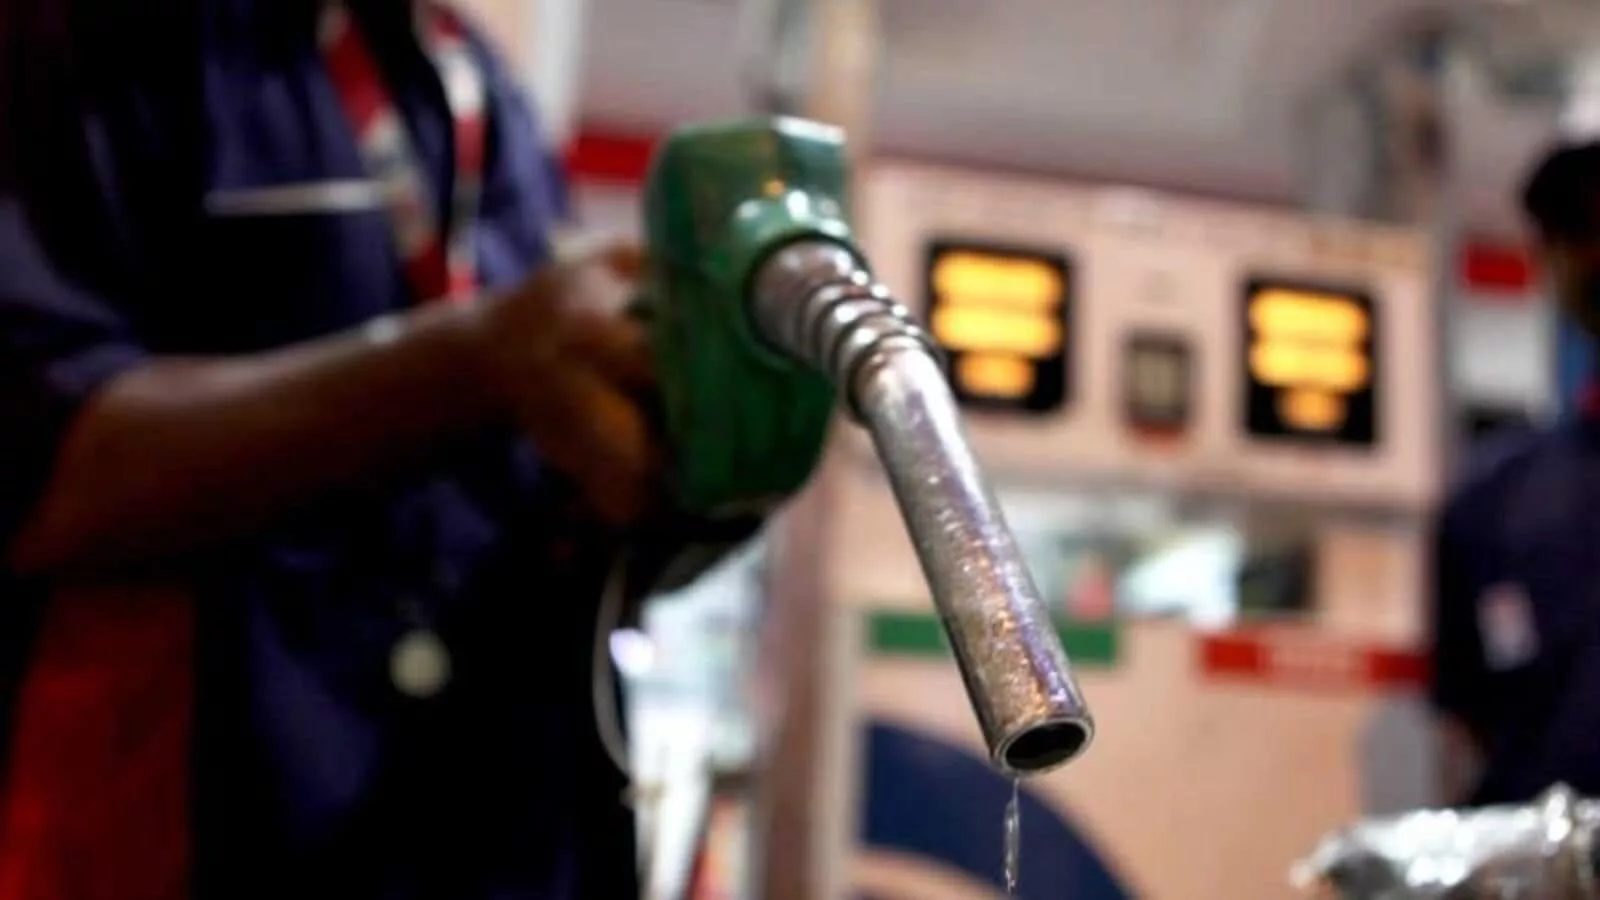 India's annual petrol consumption doubles in a decade, posts 117% growth